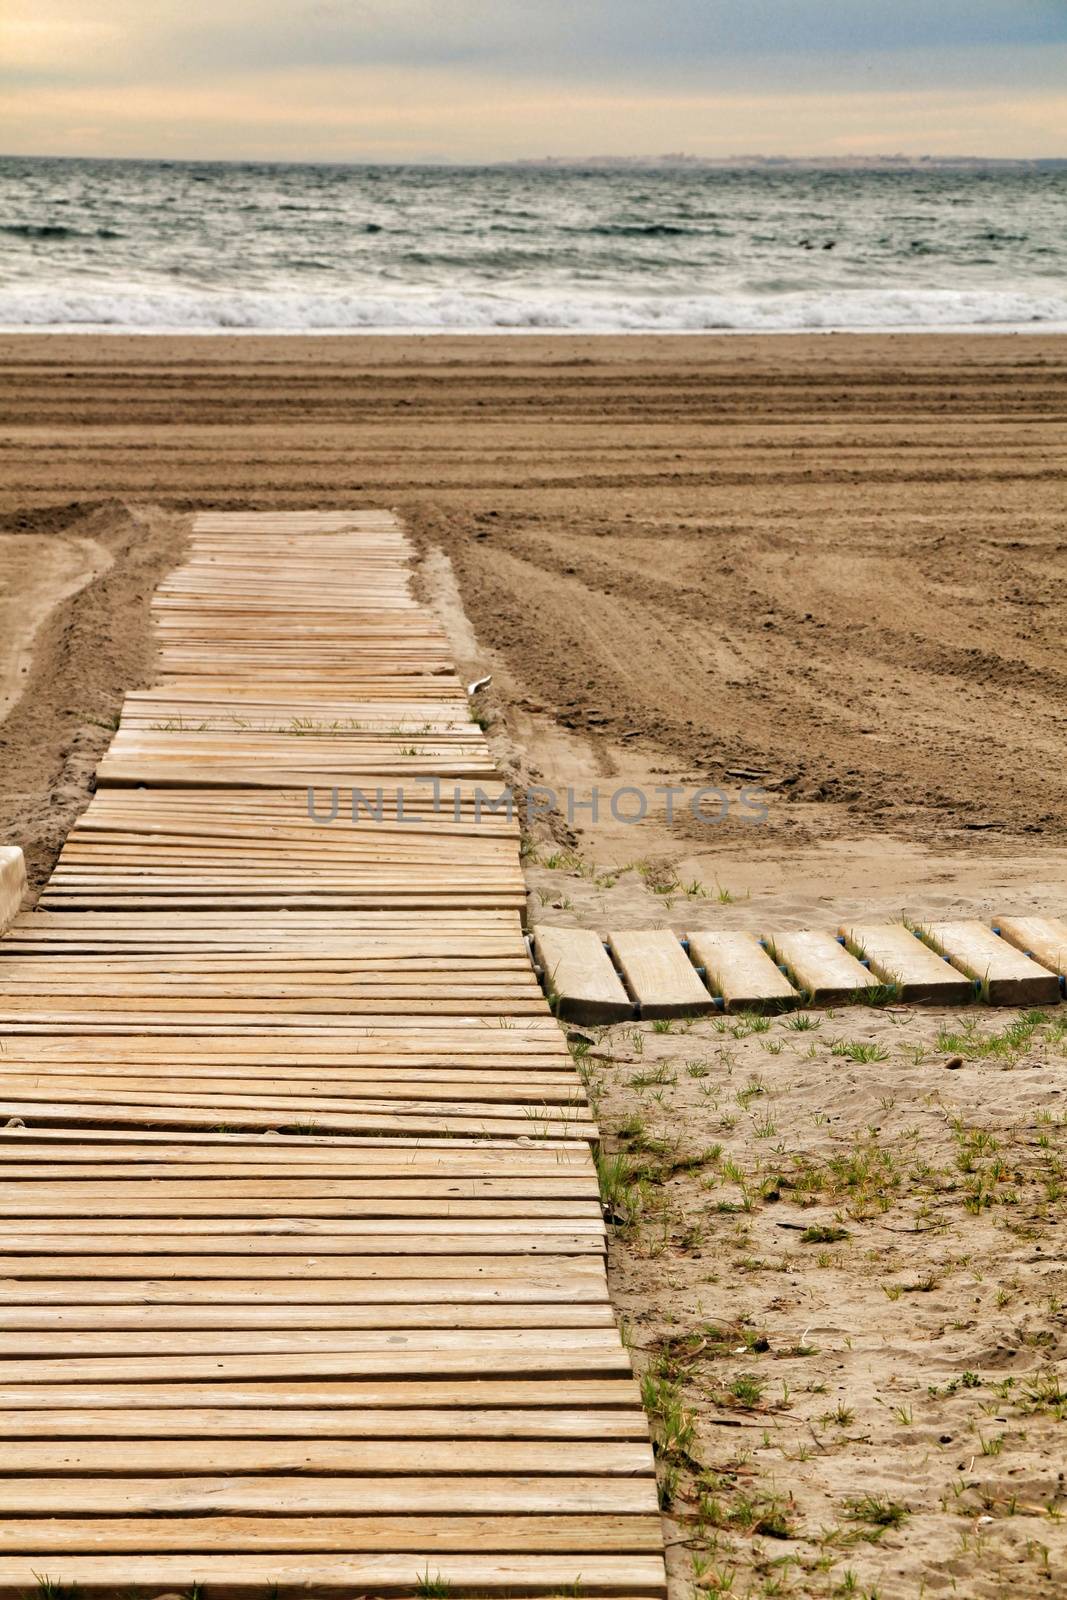 Wooden walkway to the beach in the morning in a cloudy day